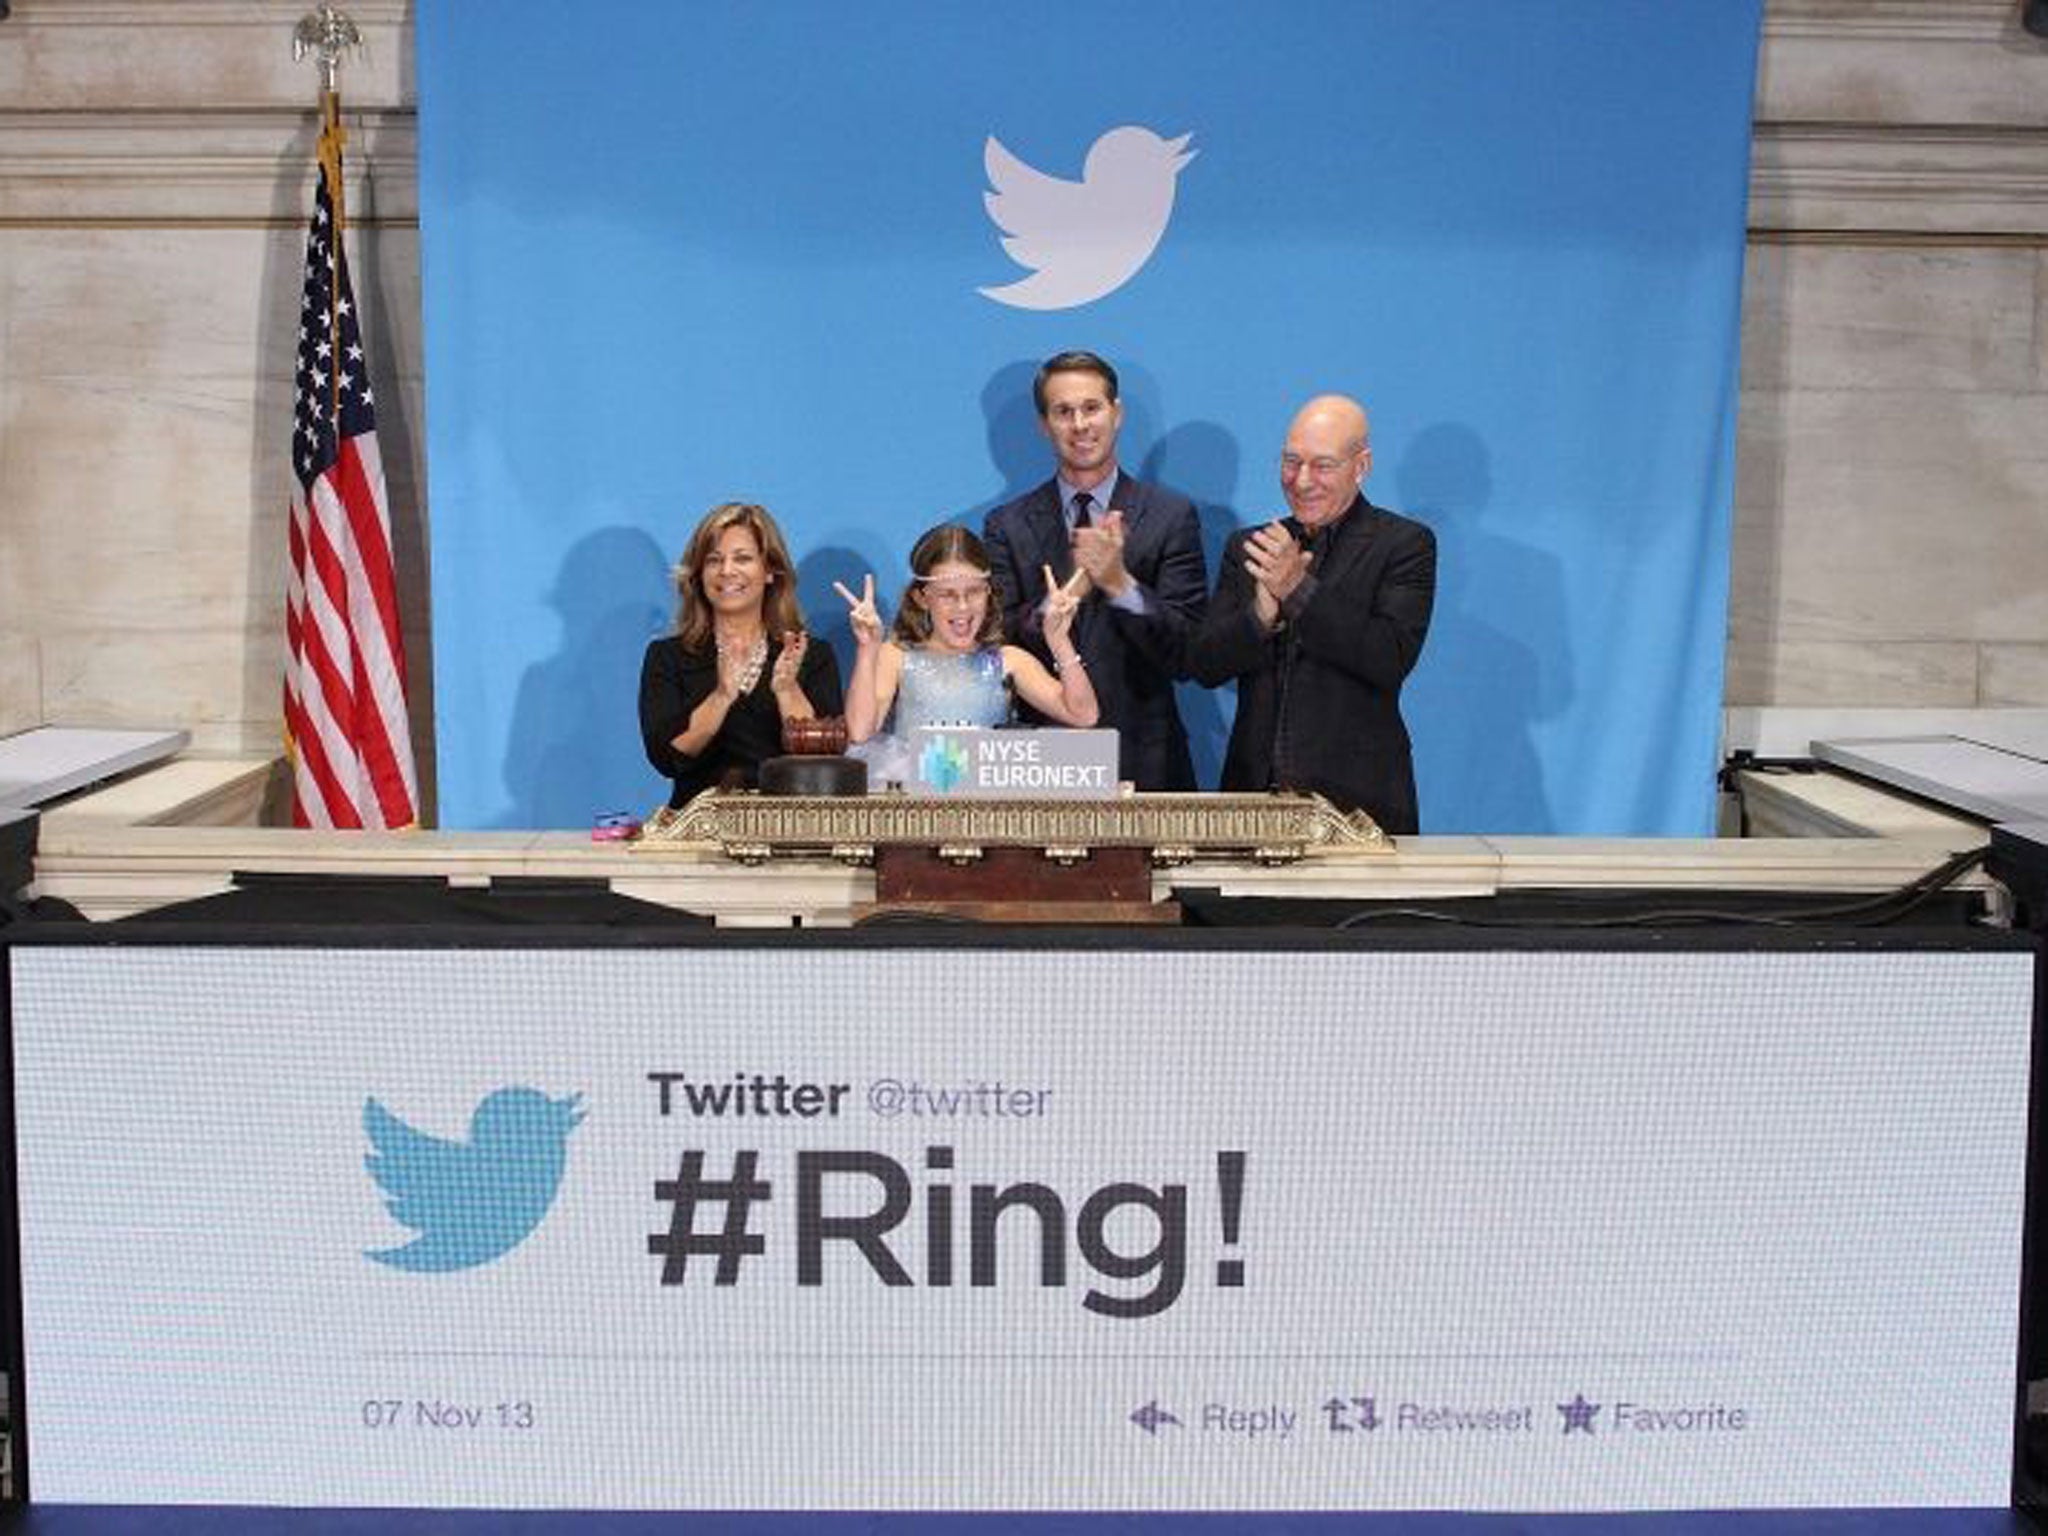 British actor Sir Patrick Stewart (R), flanked by Vivienne Harr (2-L), Boston police officer Cheryl Fiandaca (L) and Twitter co-founder Evan Williams (2-R) at the ringing of the opening bell to mark Twitter's highly anticipated initial public offering (IPO), New York